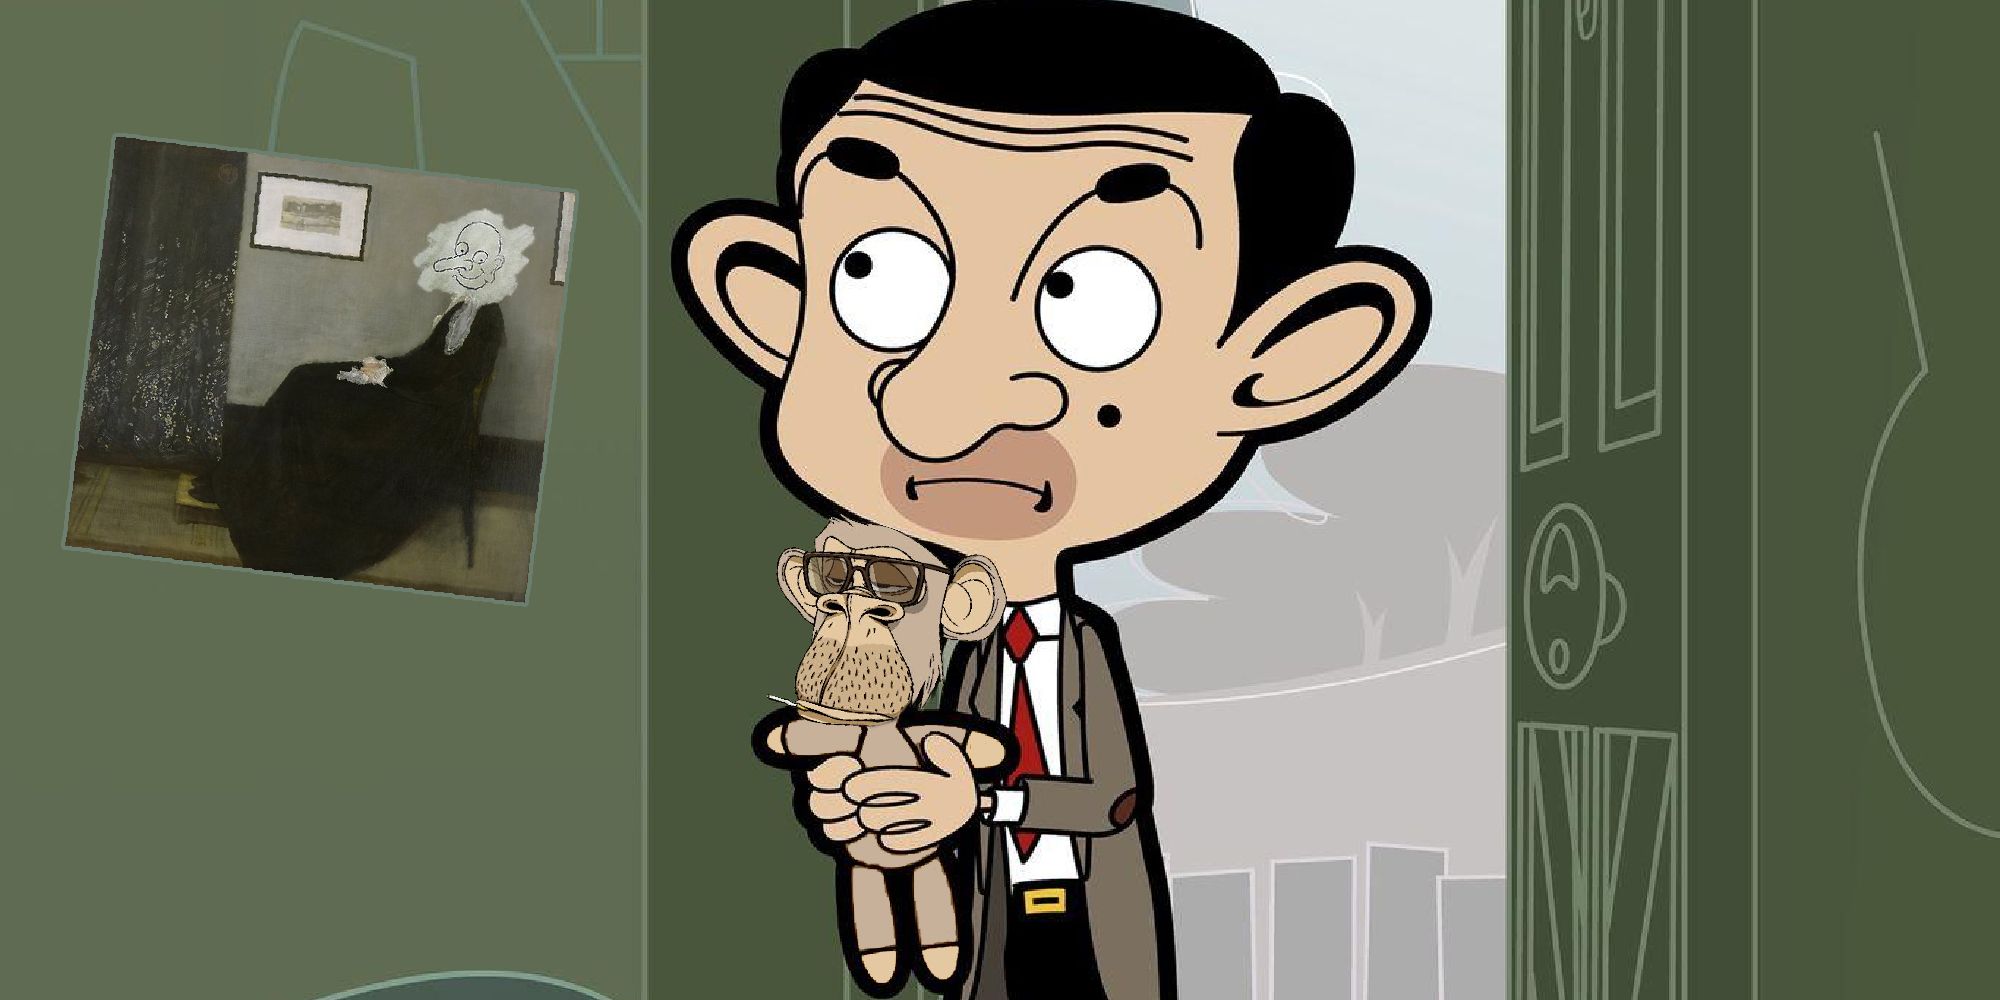 mr bean holding an nft monkey instead of teddy and looking at the ruined picture from the bean film